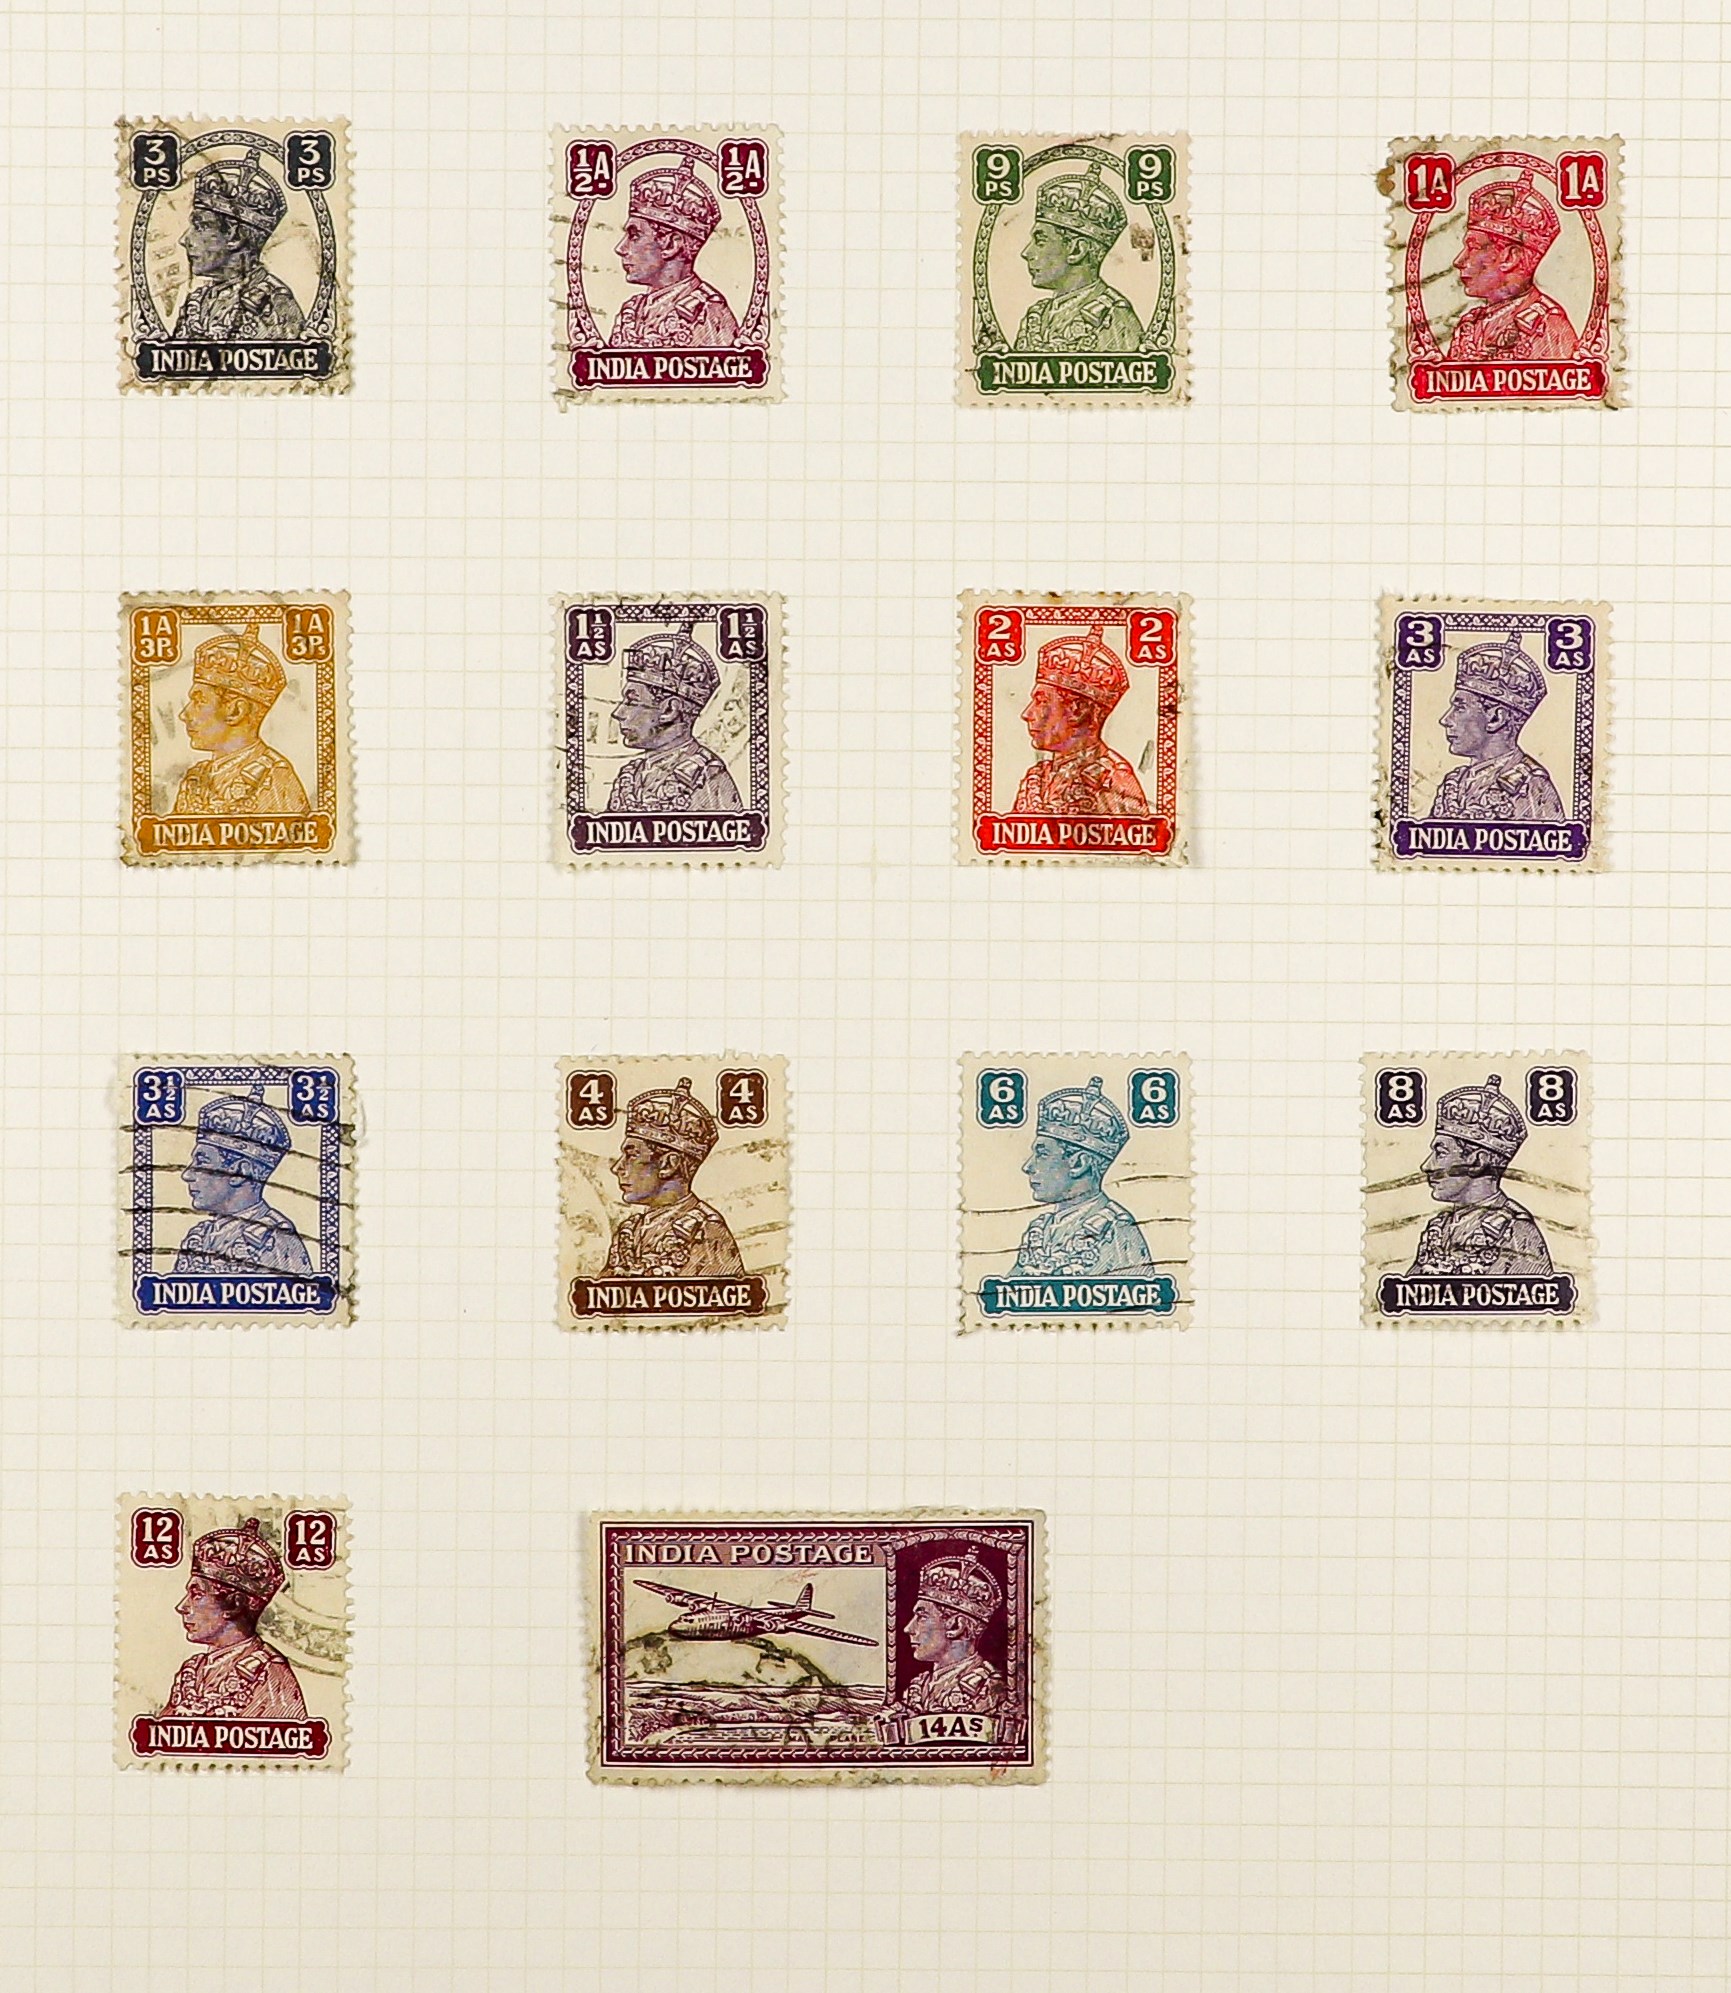 INDIA 1854 - 1952 USED COLLECTION of 400+ stamps on pages, note 1854-55 ½a (2), 1a (5), 2a (3) & 4a, - Image 15 of 27